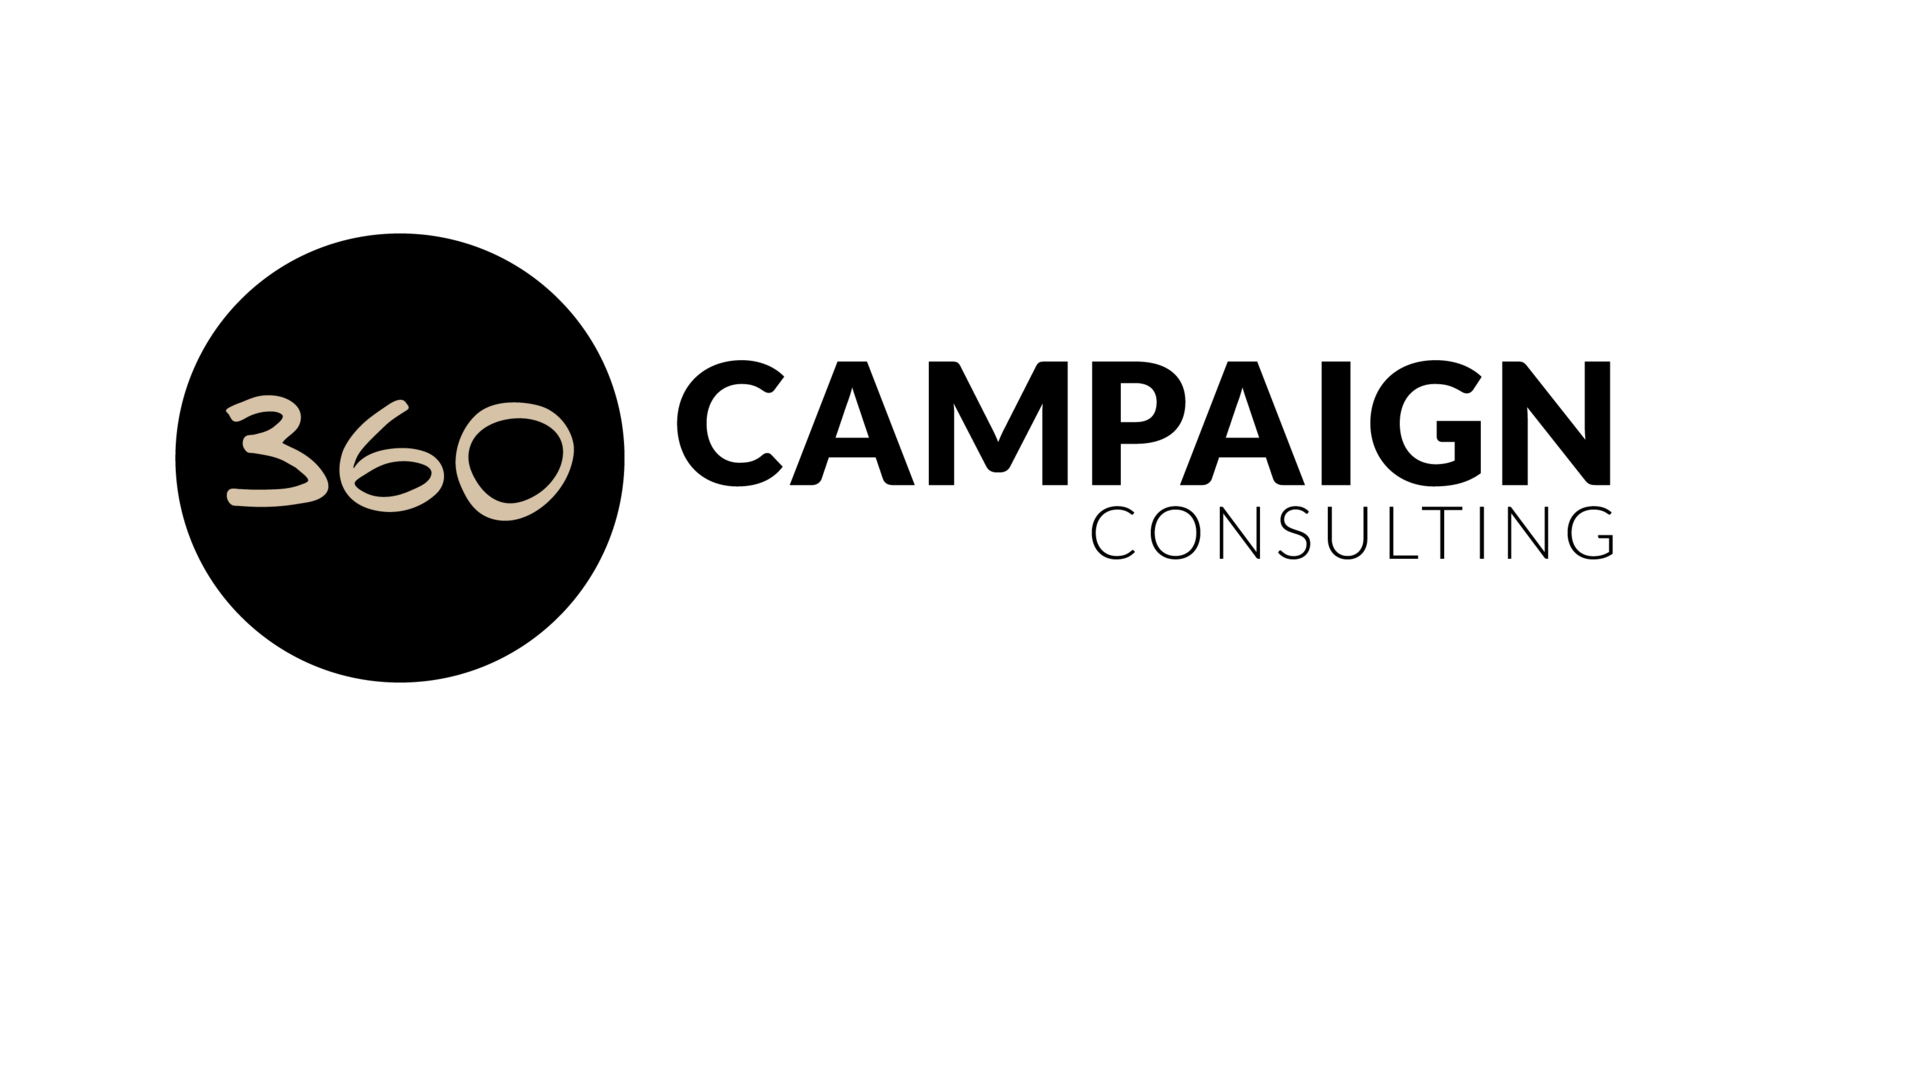 360 Campaign Consulting